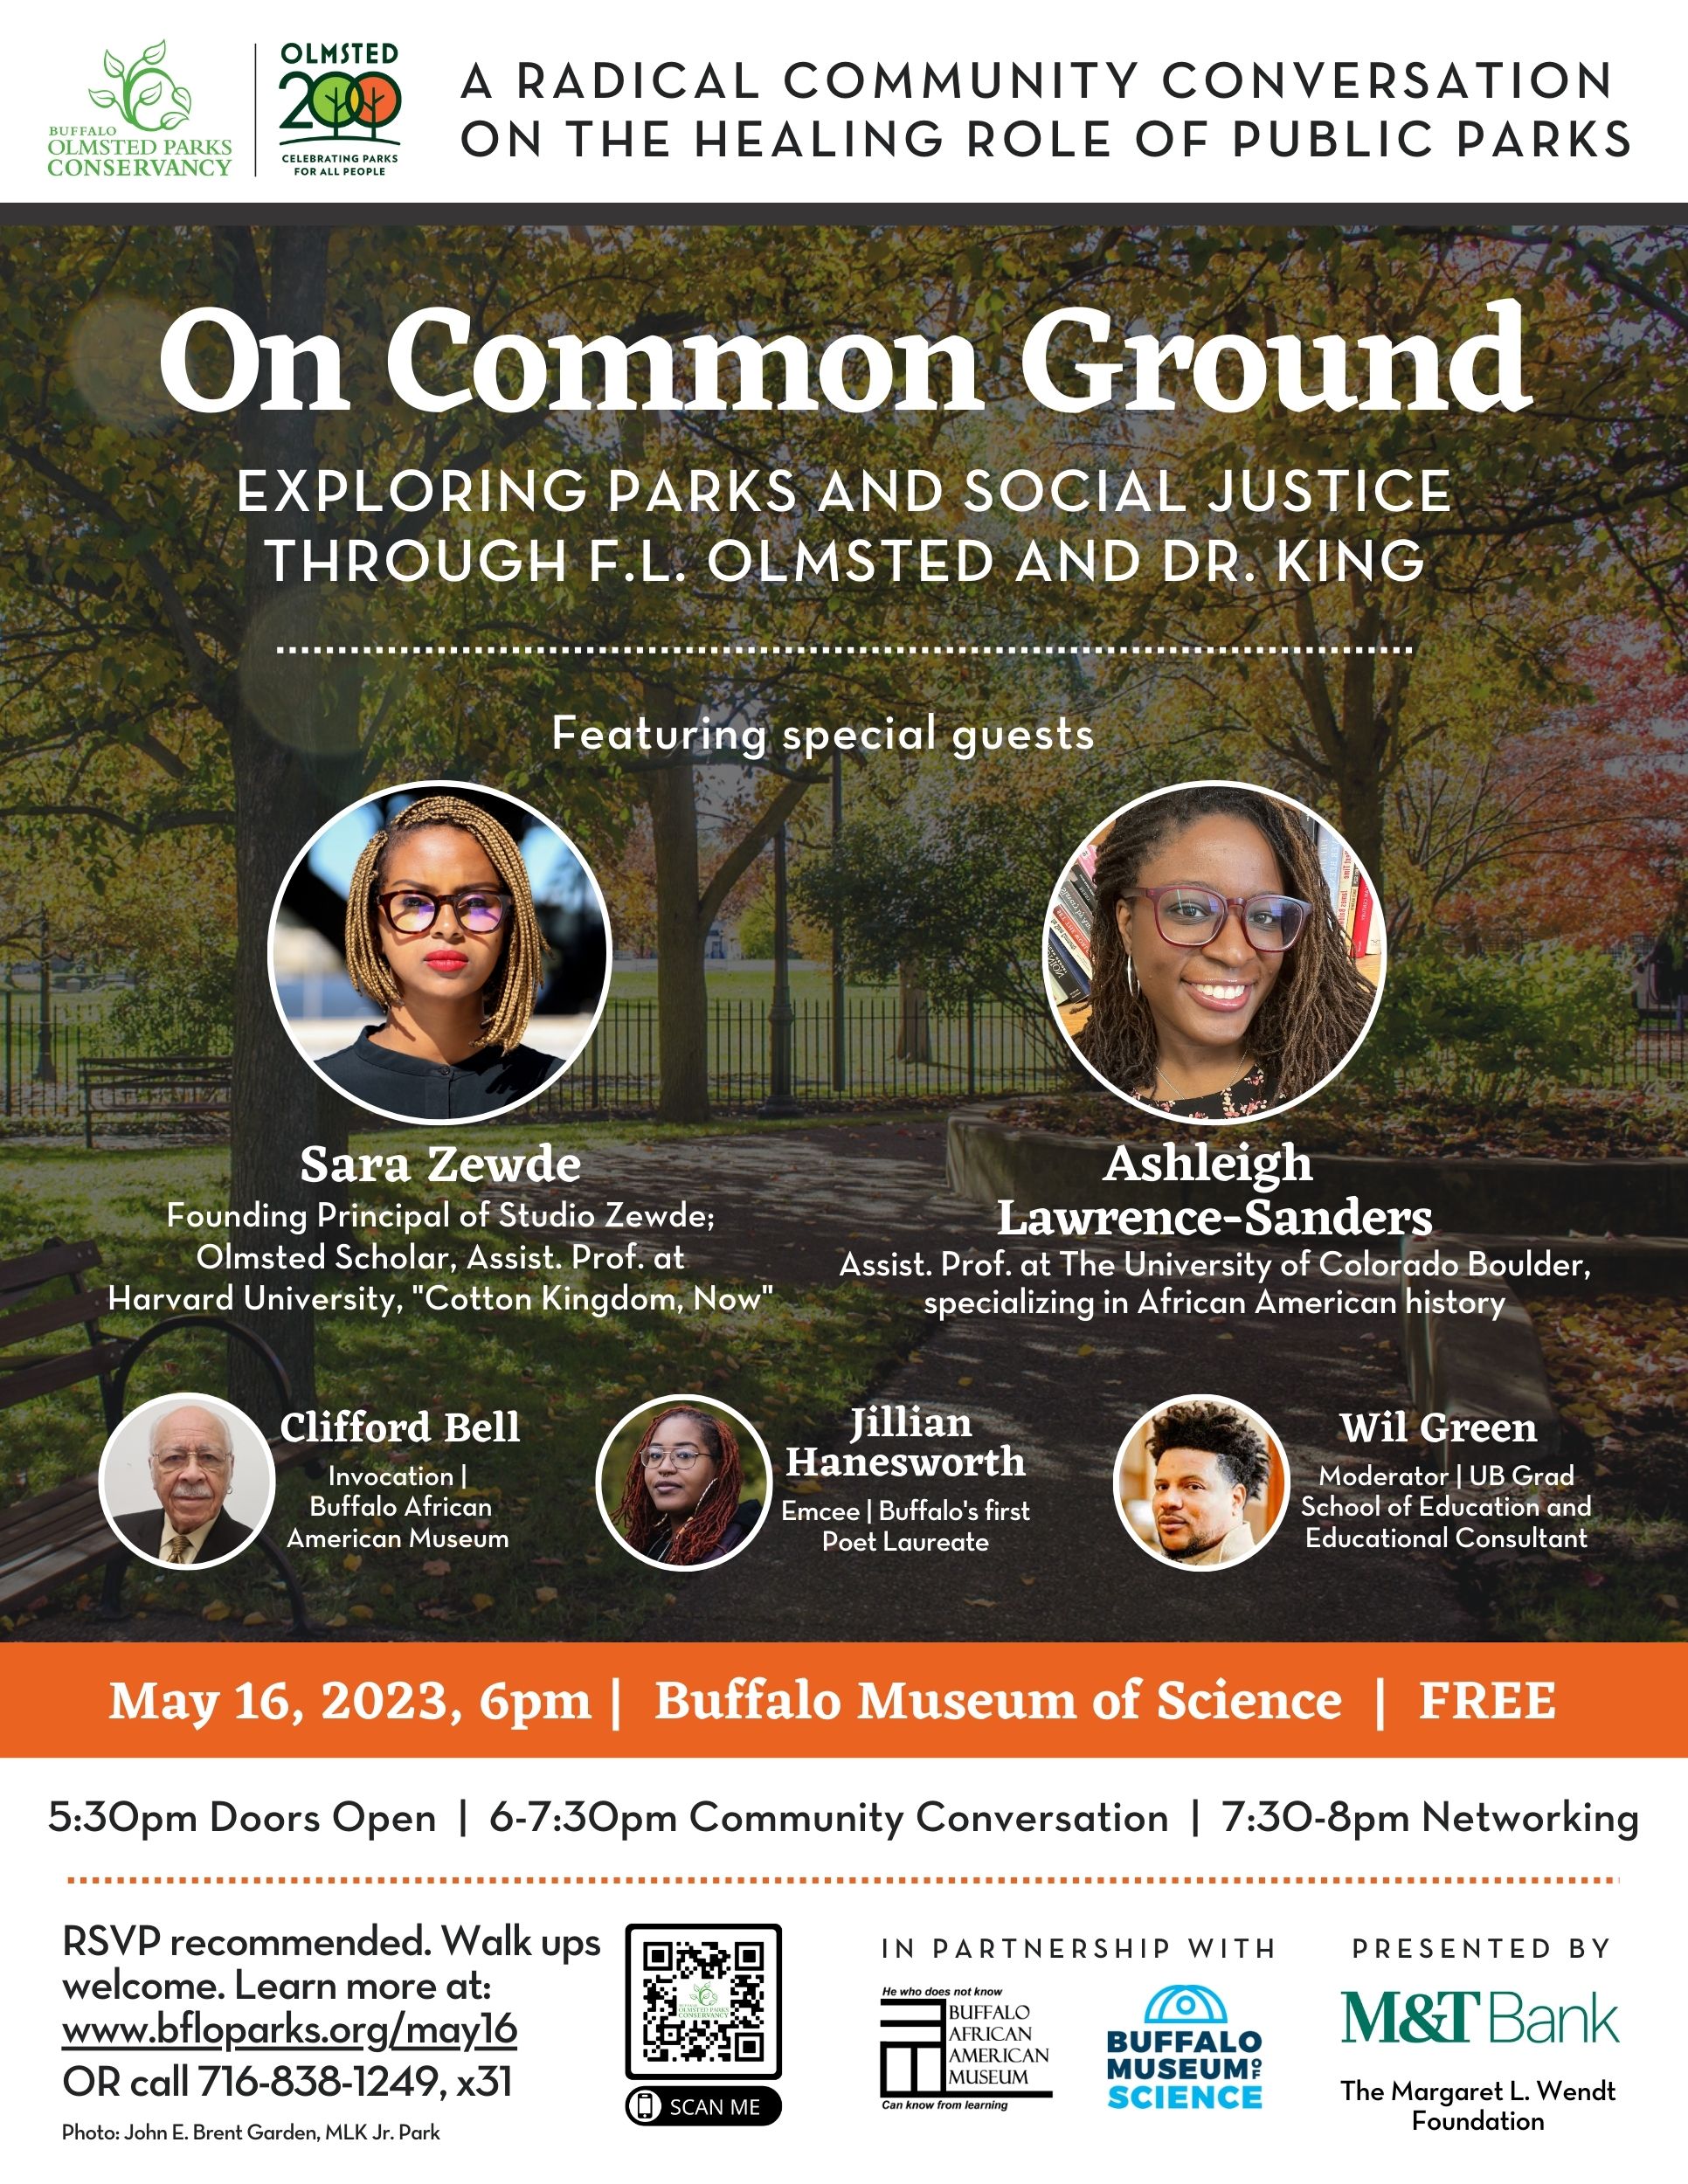 Flyer for On Common Ground, exploring parks and social justice through Frederick Law Olmsted and MLK Jr., May 16 at the Buffalo Museum of Science, 6pm to 8pm. Call Zhi at 716-838-1249 extension 31 for more inforamtion.